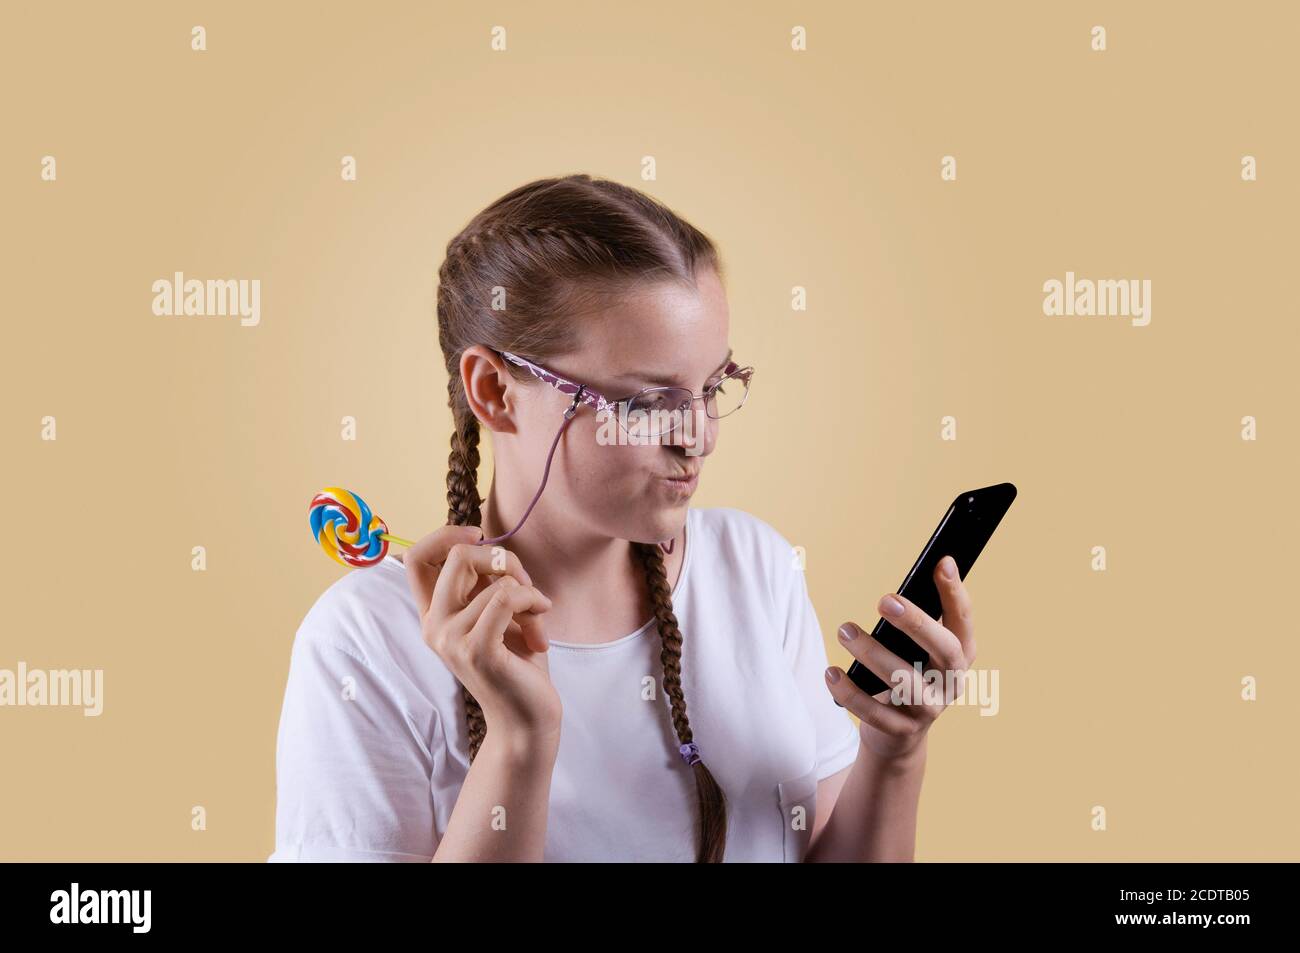 The girl looks at the phone. The girl is holding the phone. Girl with pigtails. The girl is shot against a yellow background. The girl smiles at the n Stock Photo